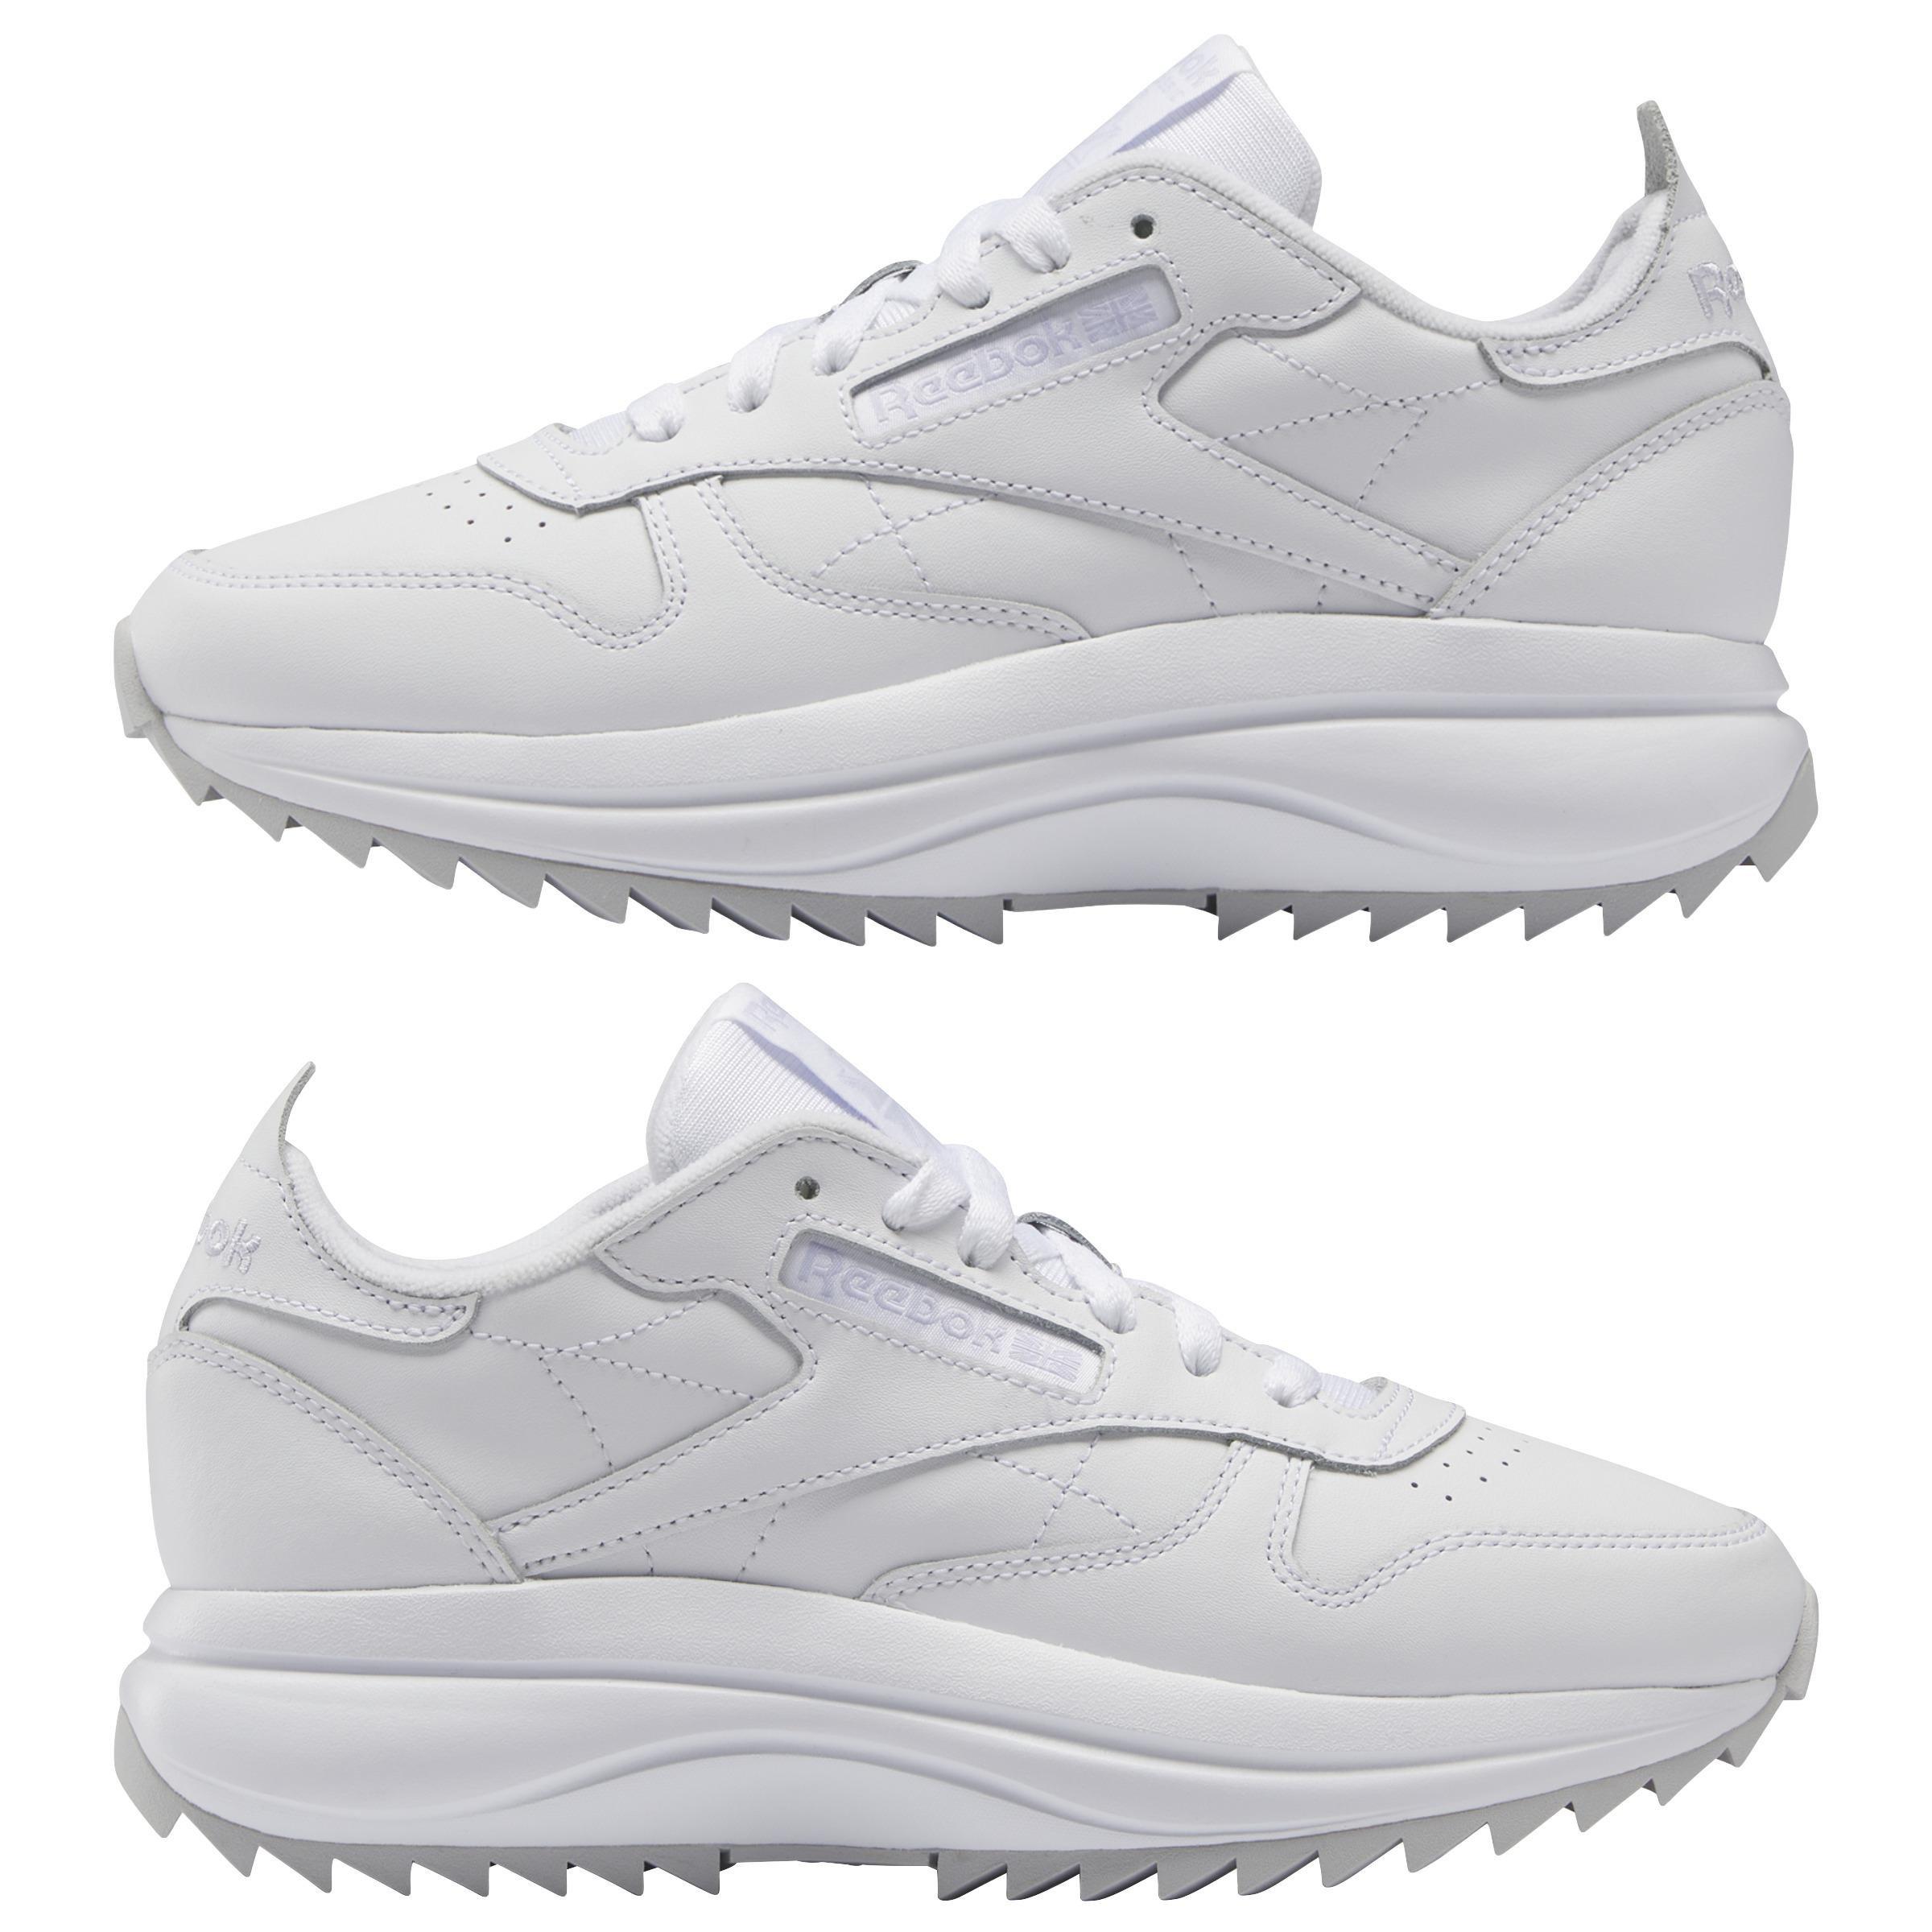 Reebok - Women Classic Leather SP Extra Shoes, White